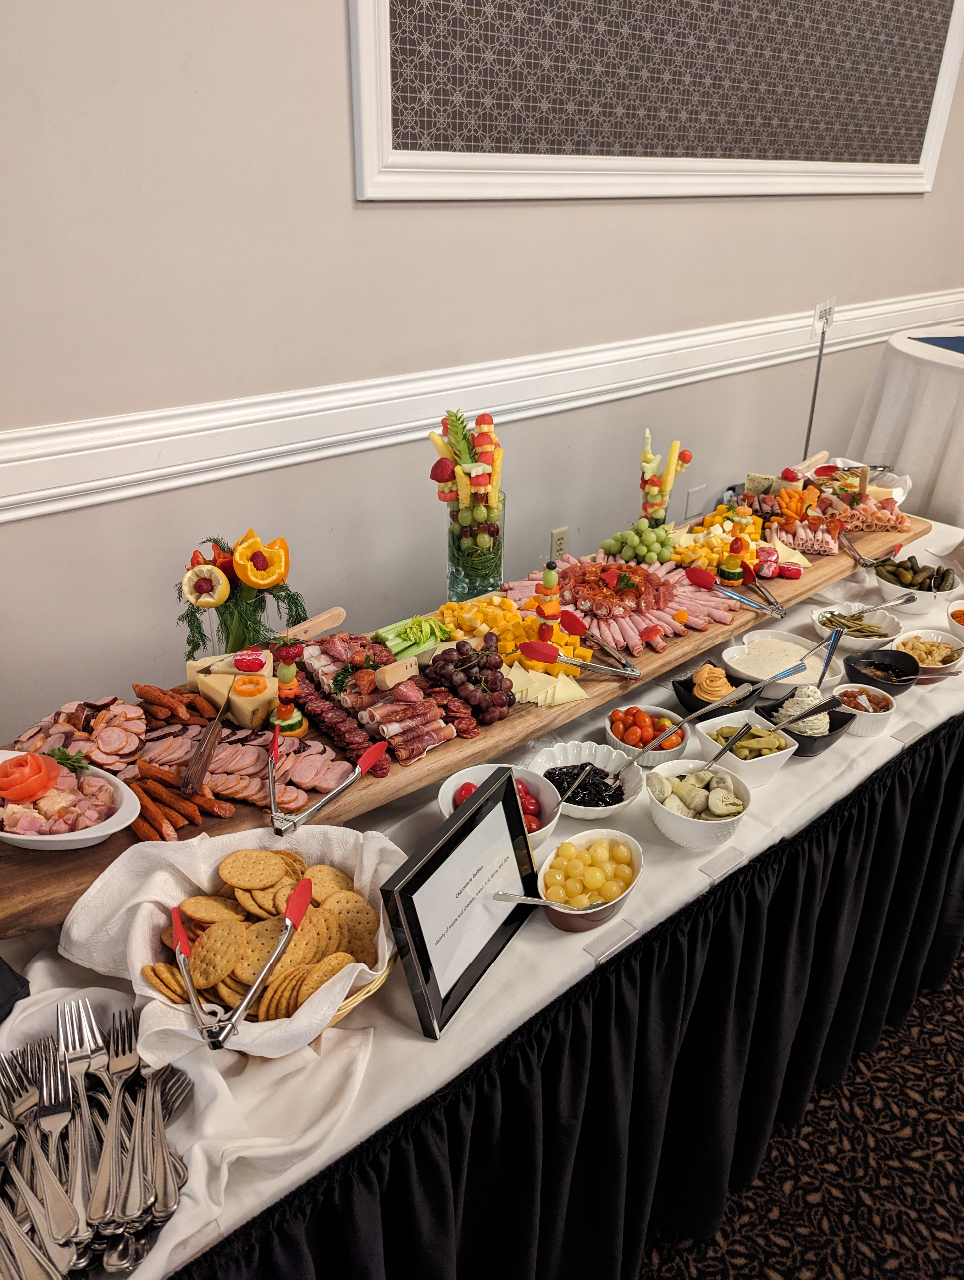 This photo features a table of some of the assorted food items for guests at the event.